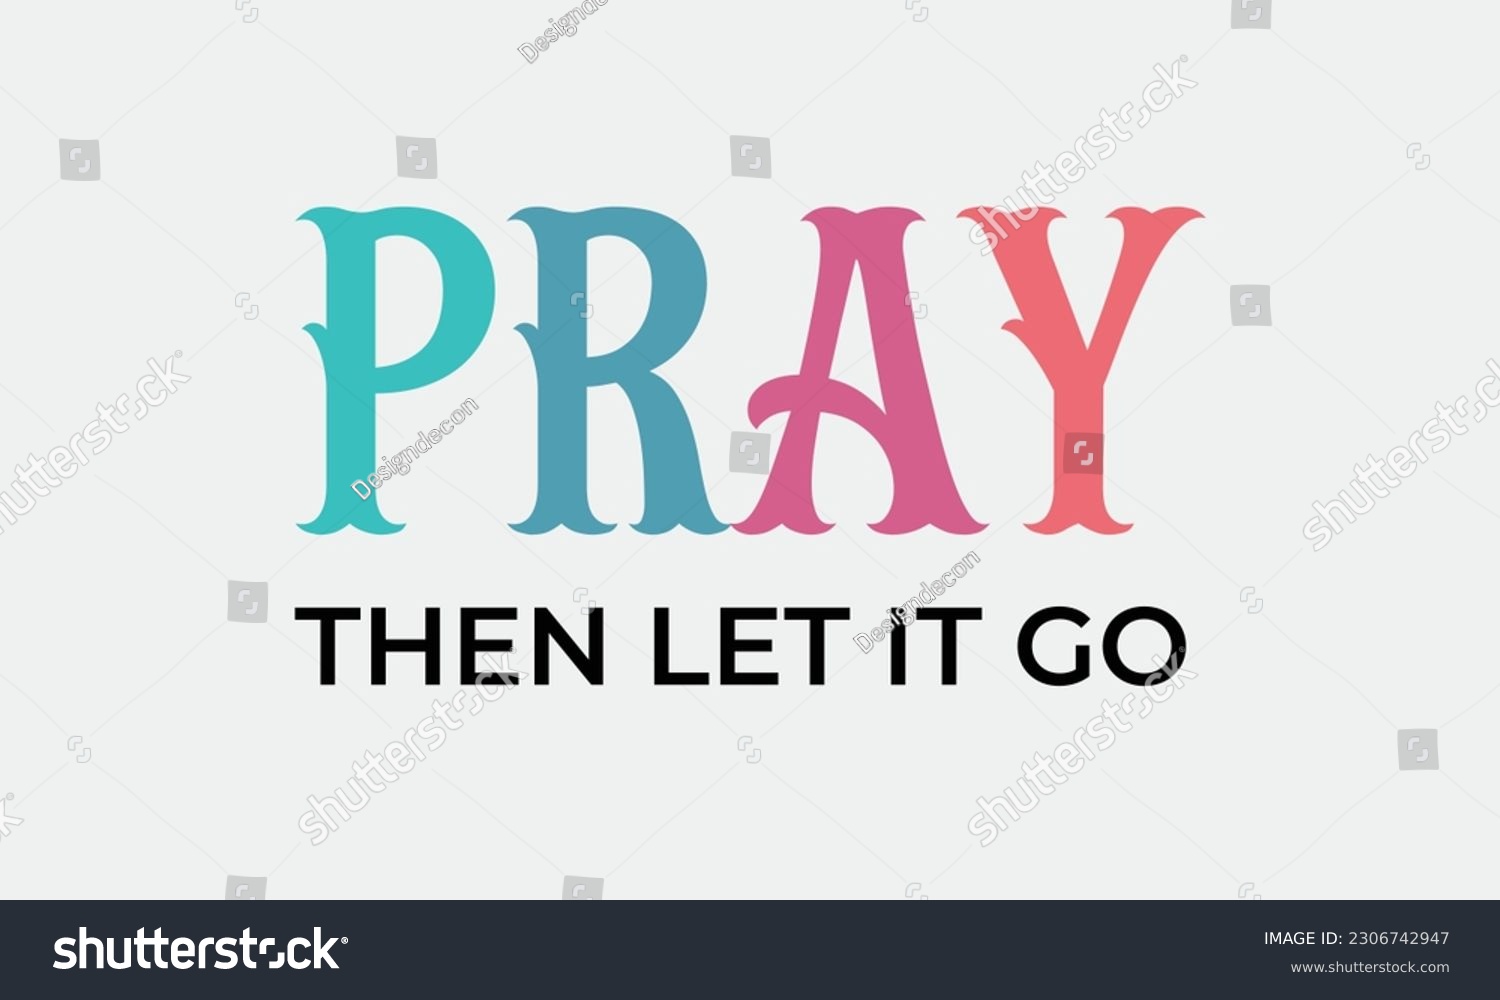 SVG of Pray then let it go Christian Inspirational quote retro colorful typographic art on white background svg